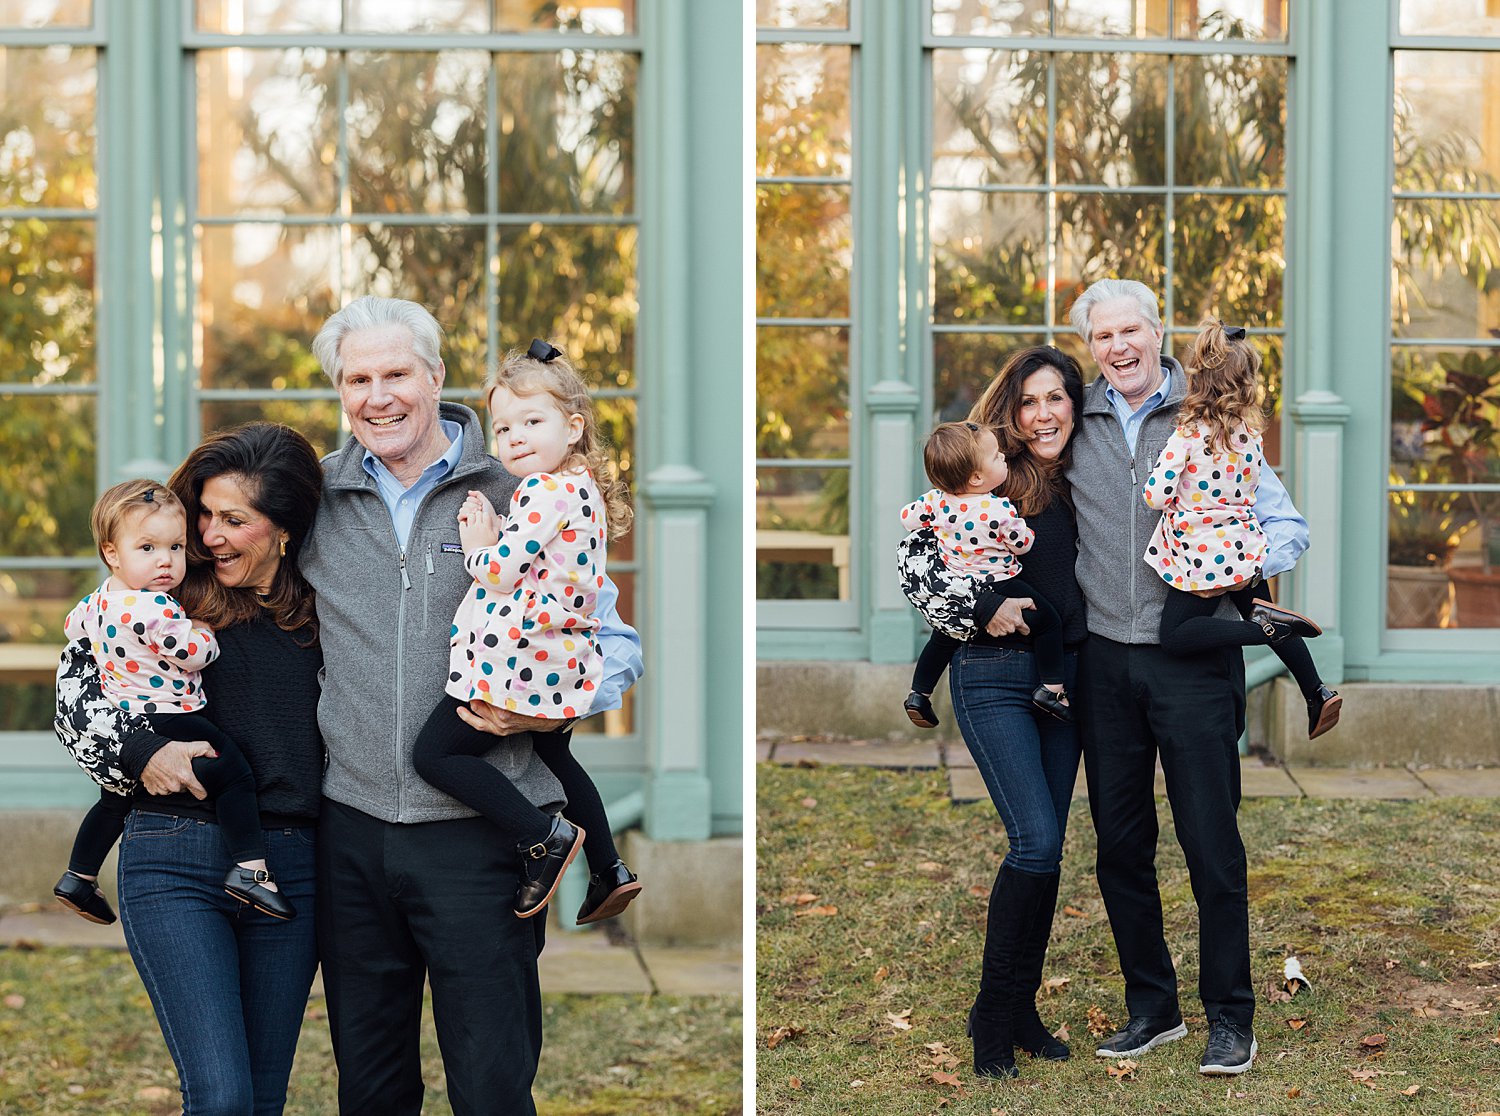 The Marshalls - Rockwood Carriage House Family Session - Wilmington Delaware Family Photographer - Alison Dunn Photography photo